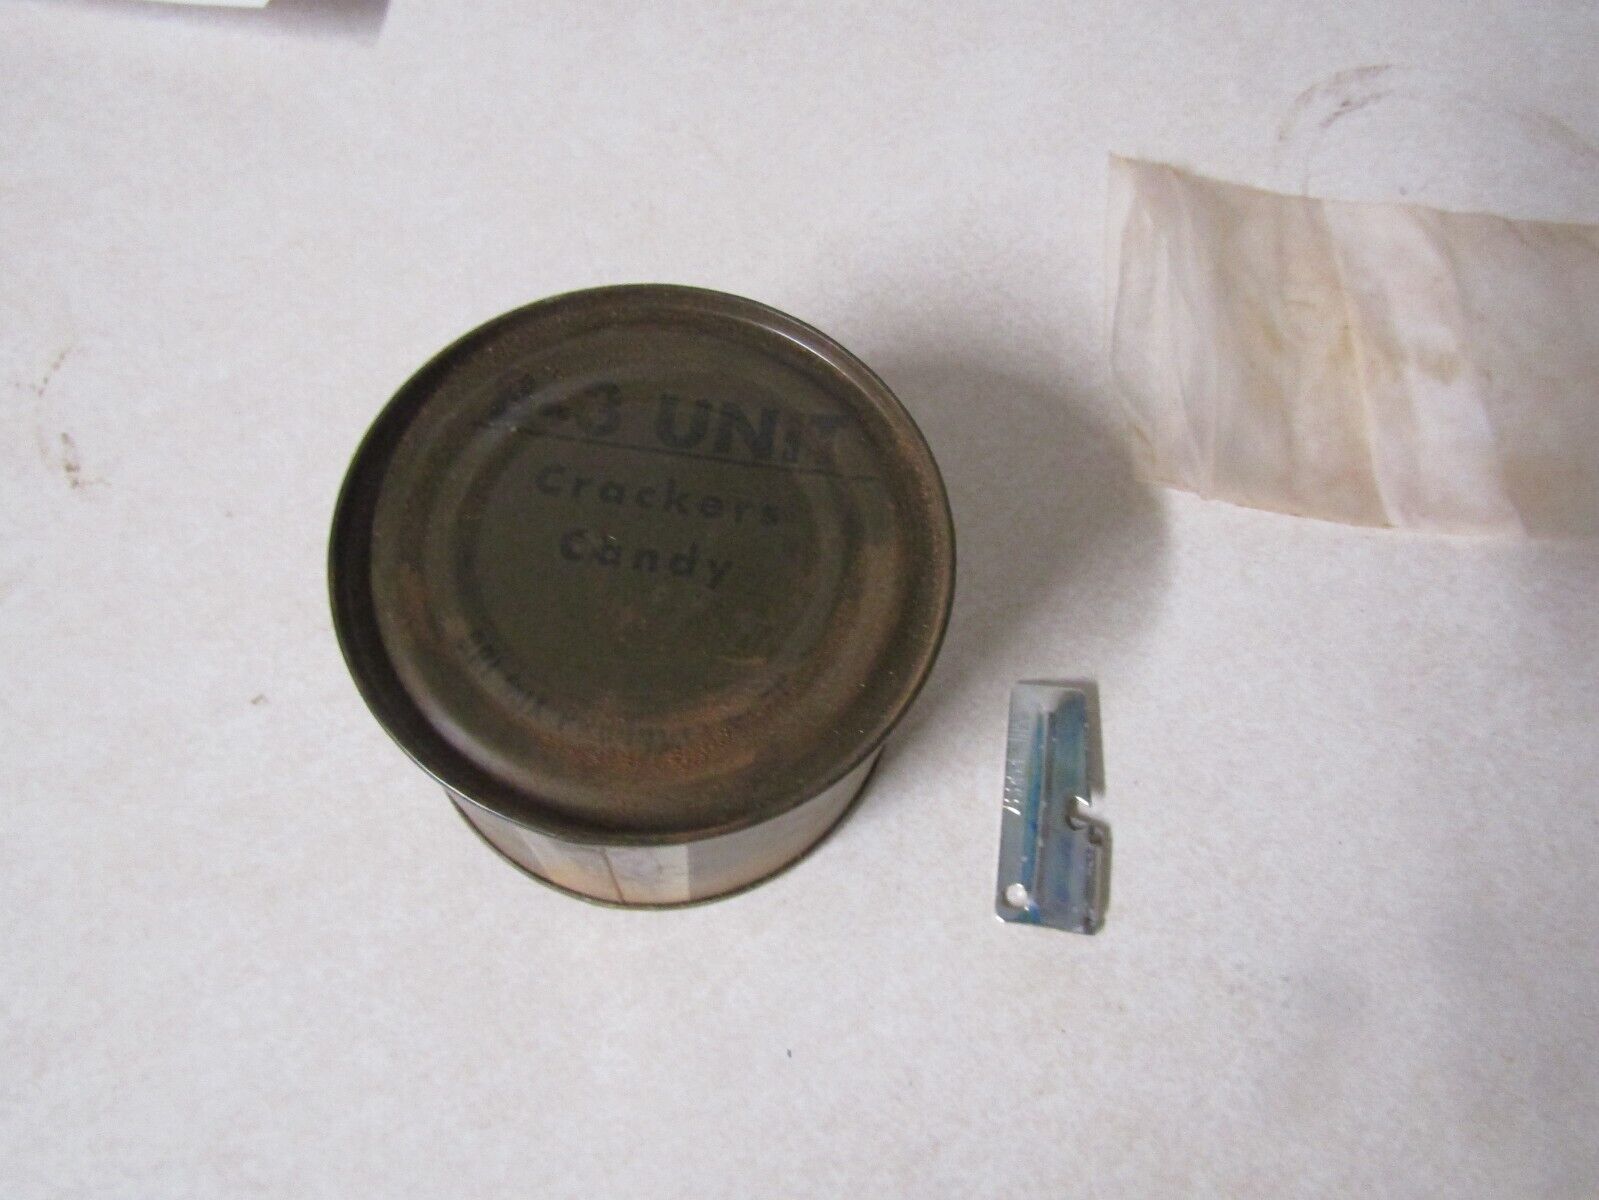 GENUINE US MILITARY VIETNAM ERA C RATION WITH FREE P-38 B-3 UNIT CRACKERS CANDY